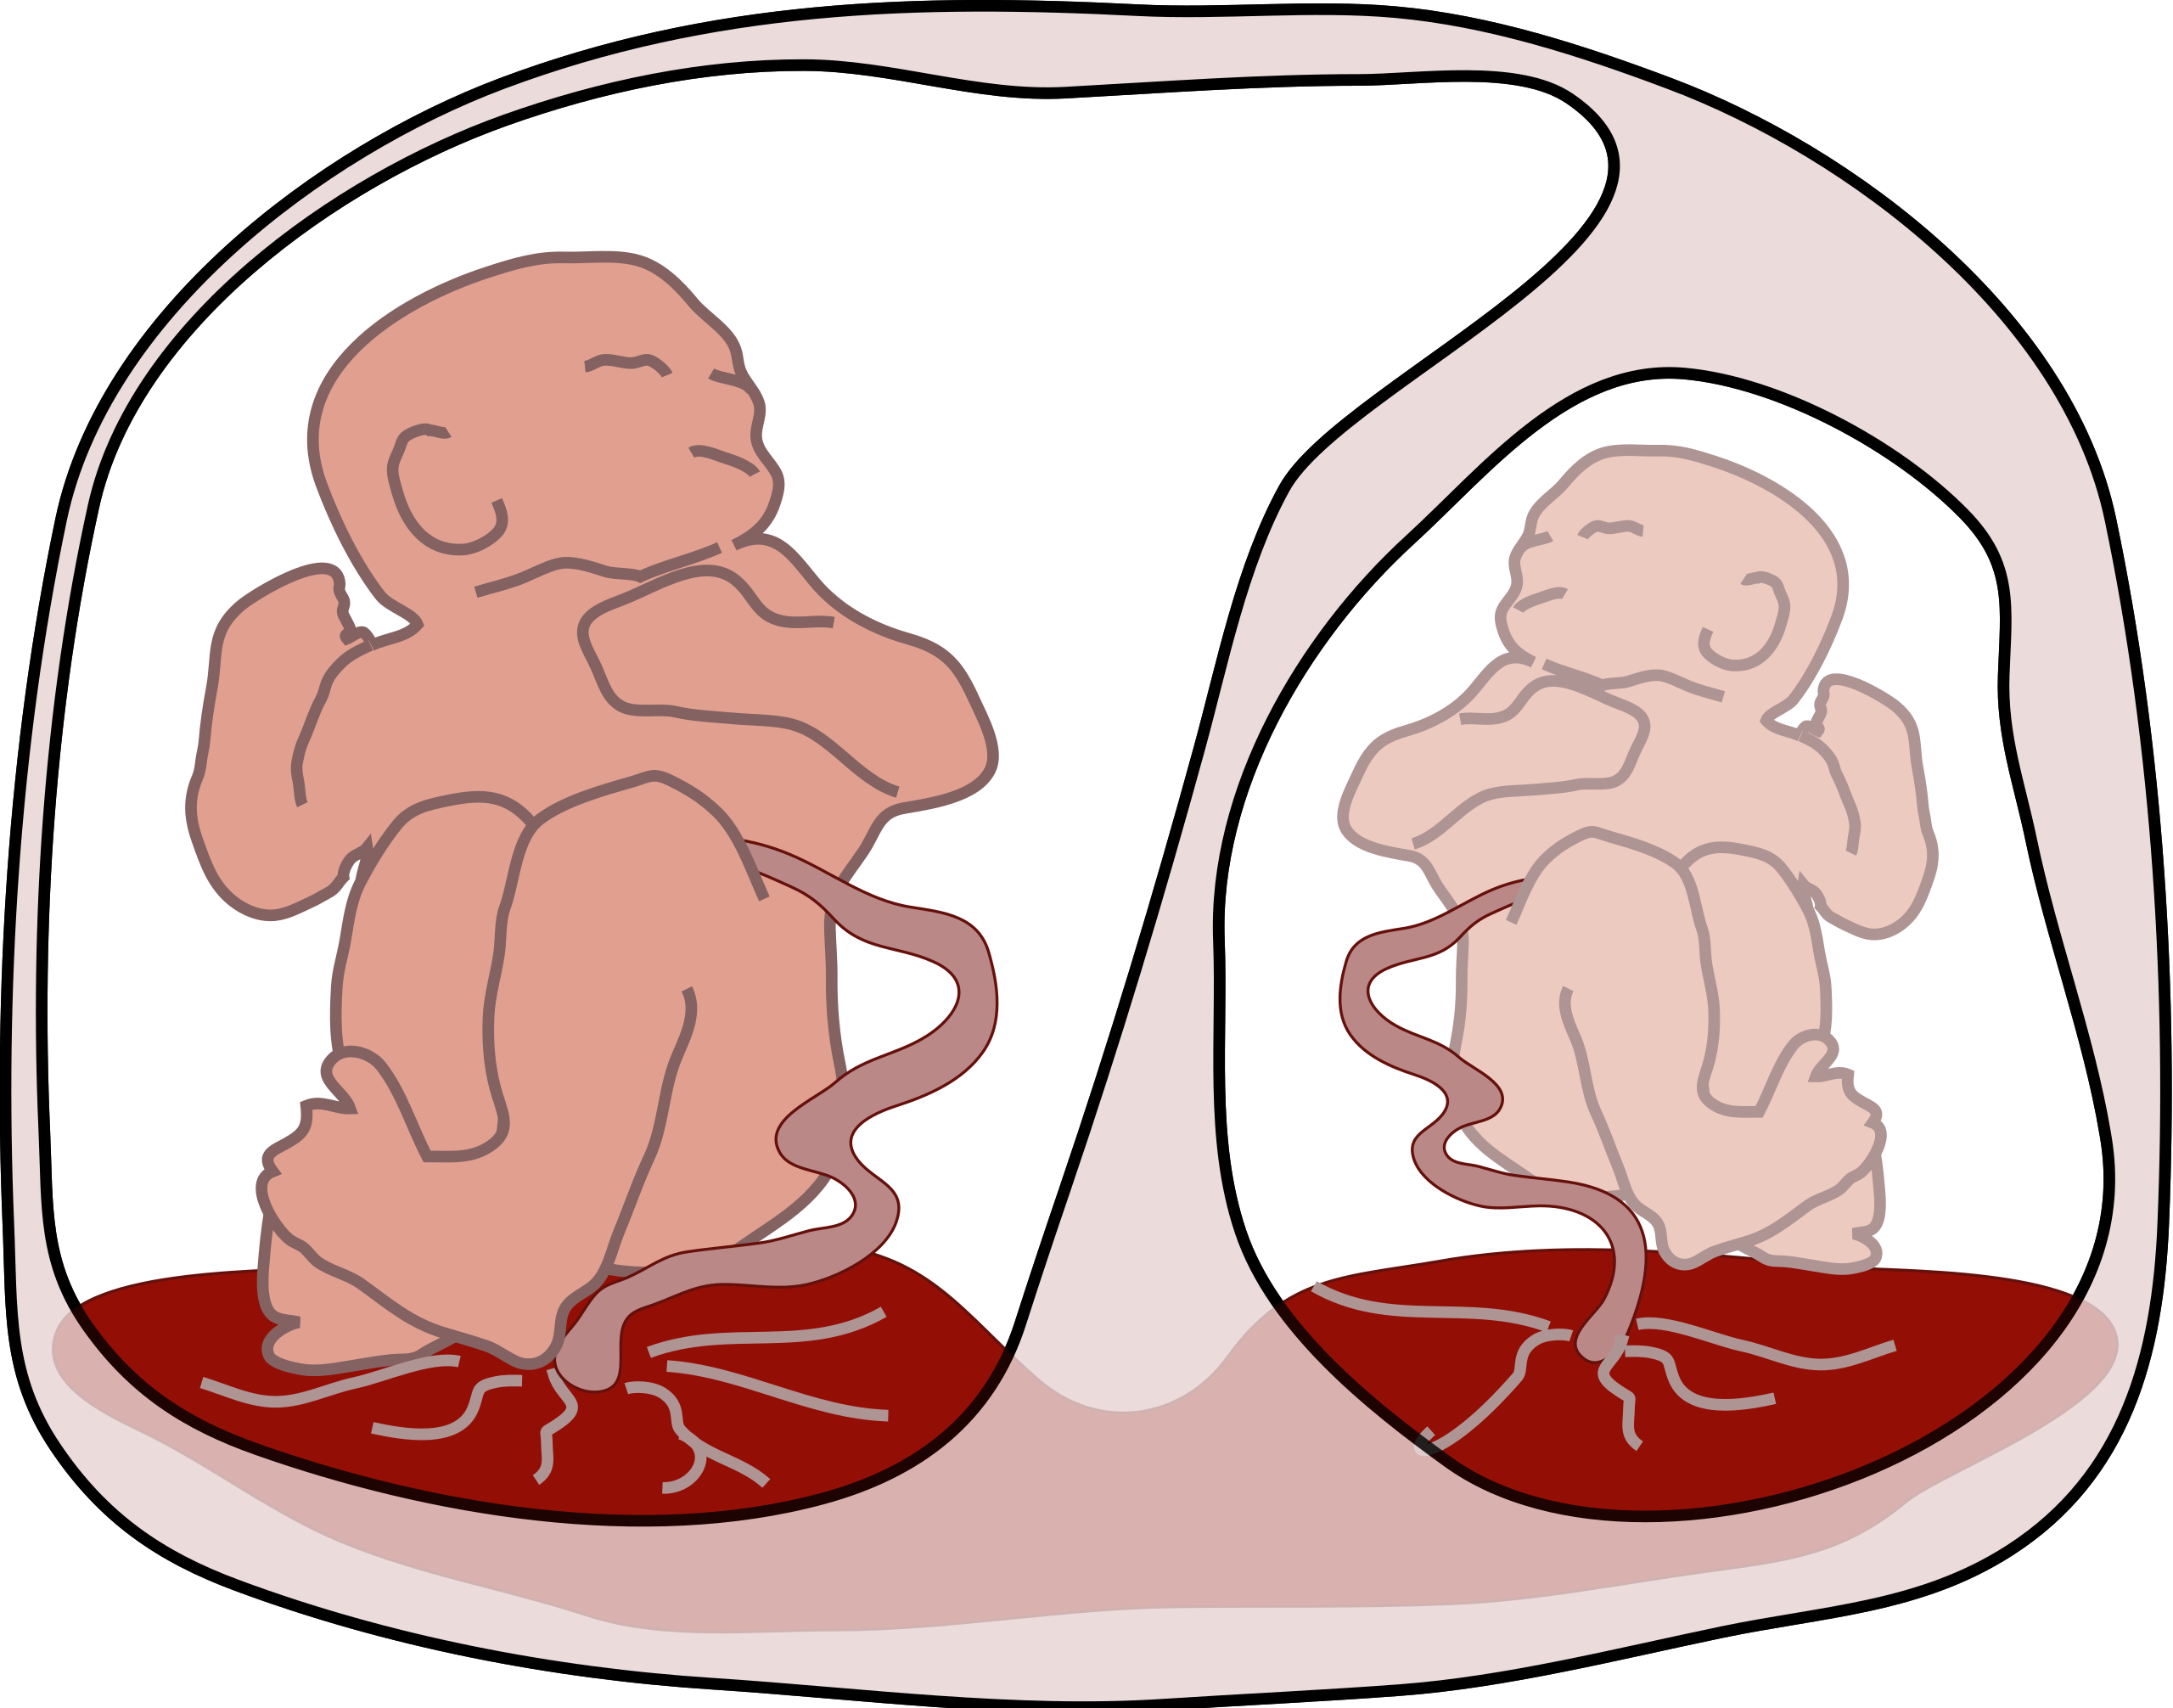 File:Twin to Twin transfusion syndrome.svg.